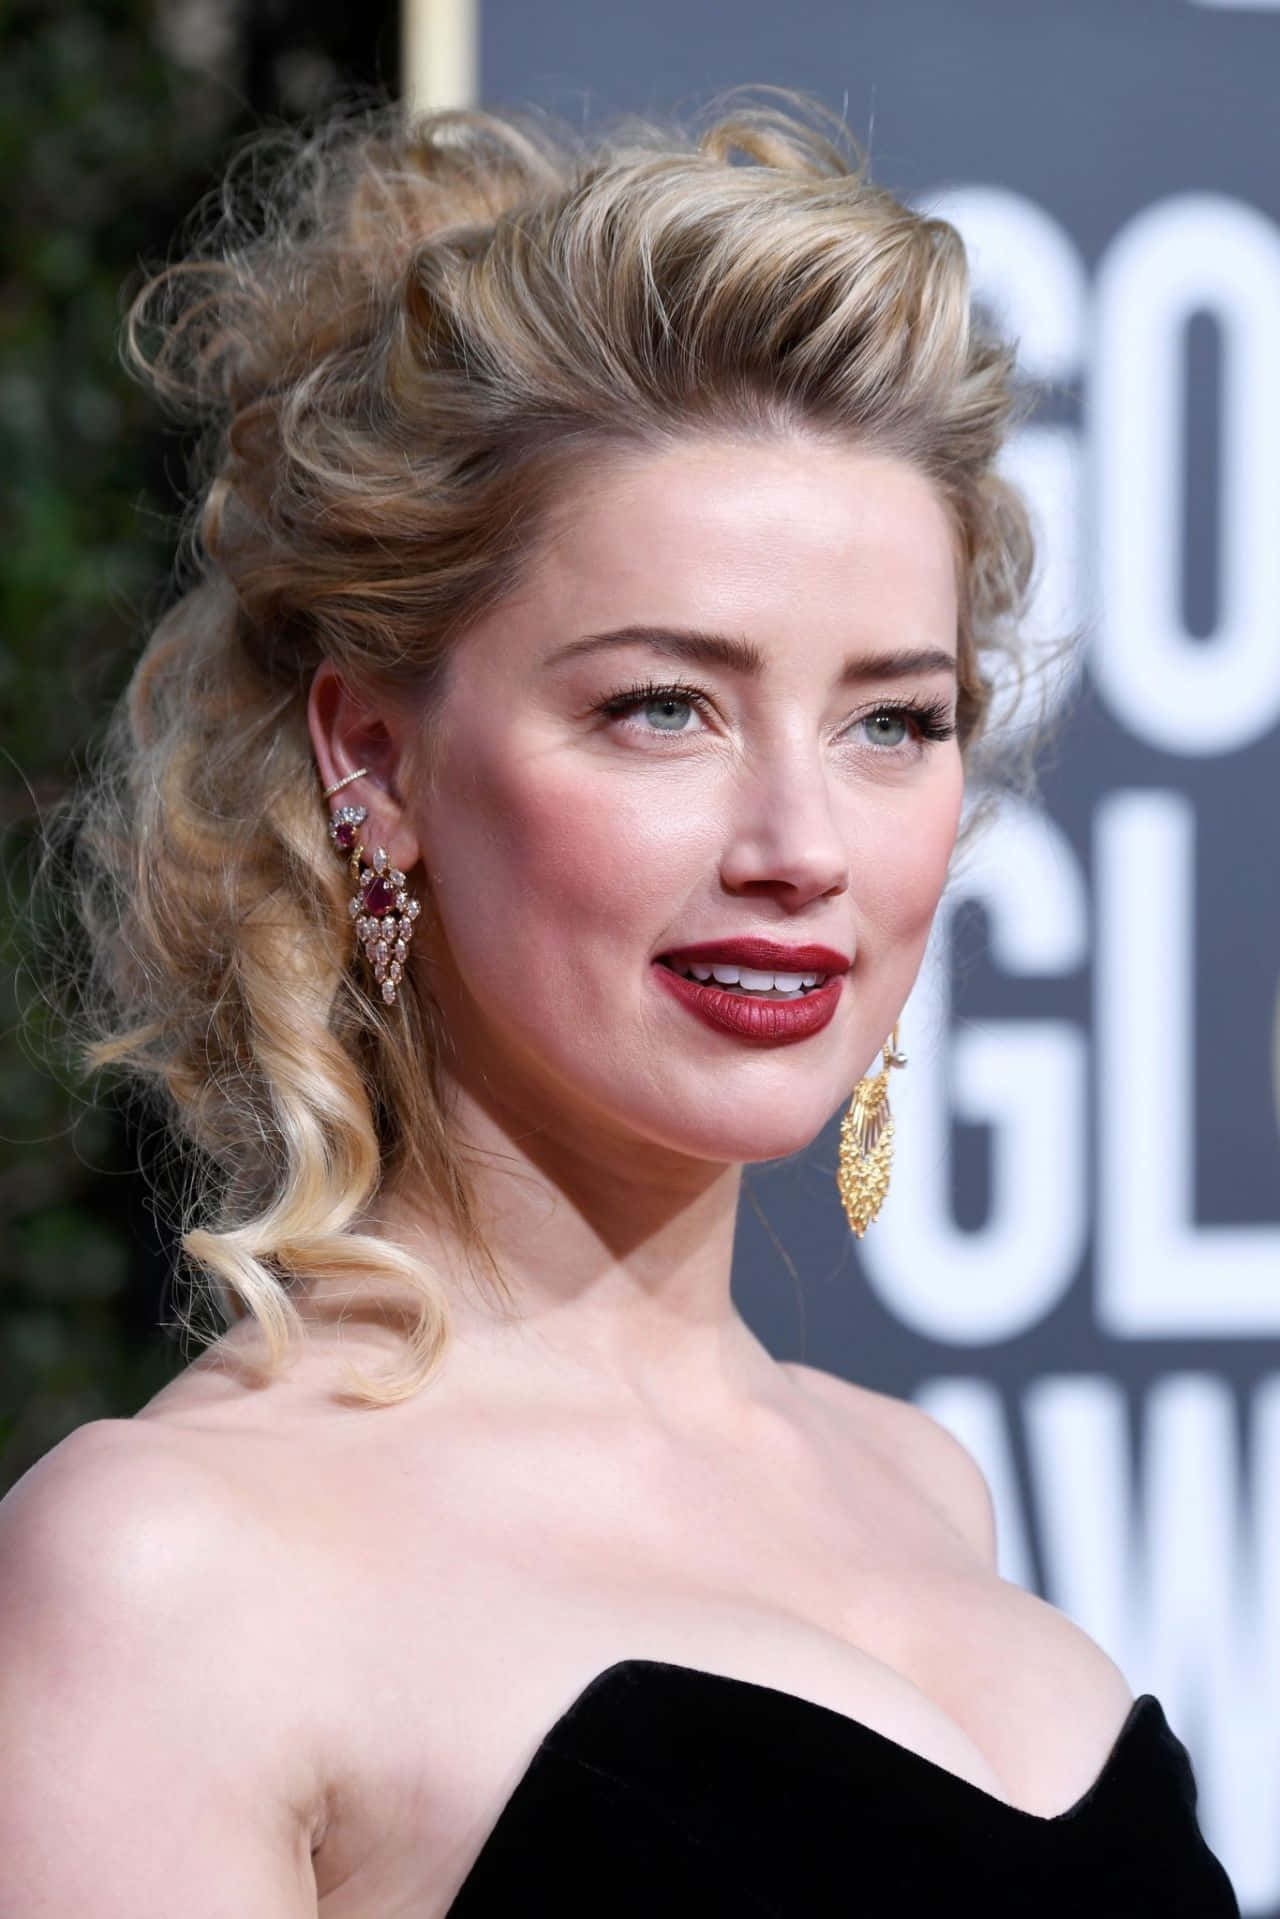 Actress Amber Heard poses on the red carpet.